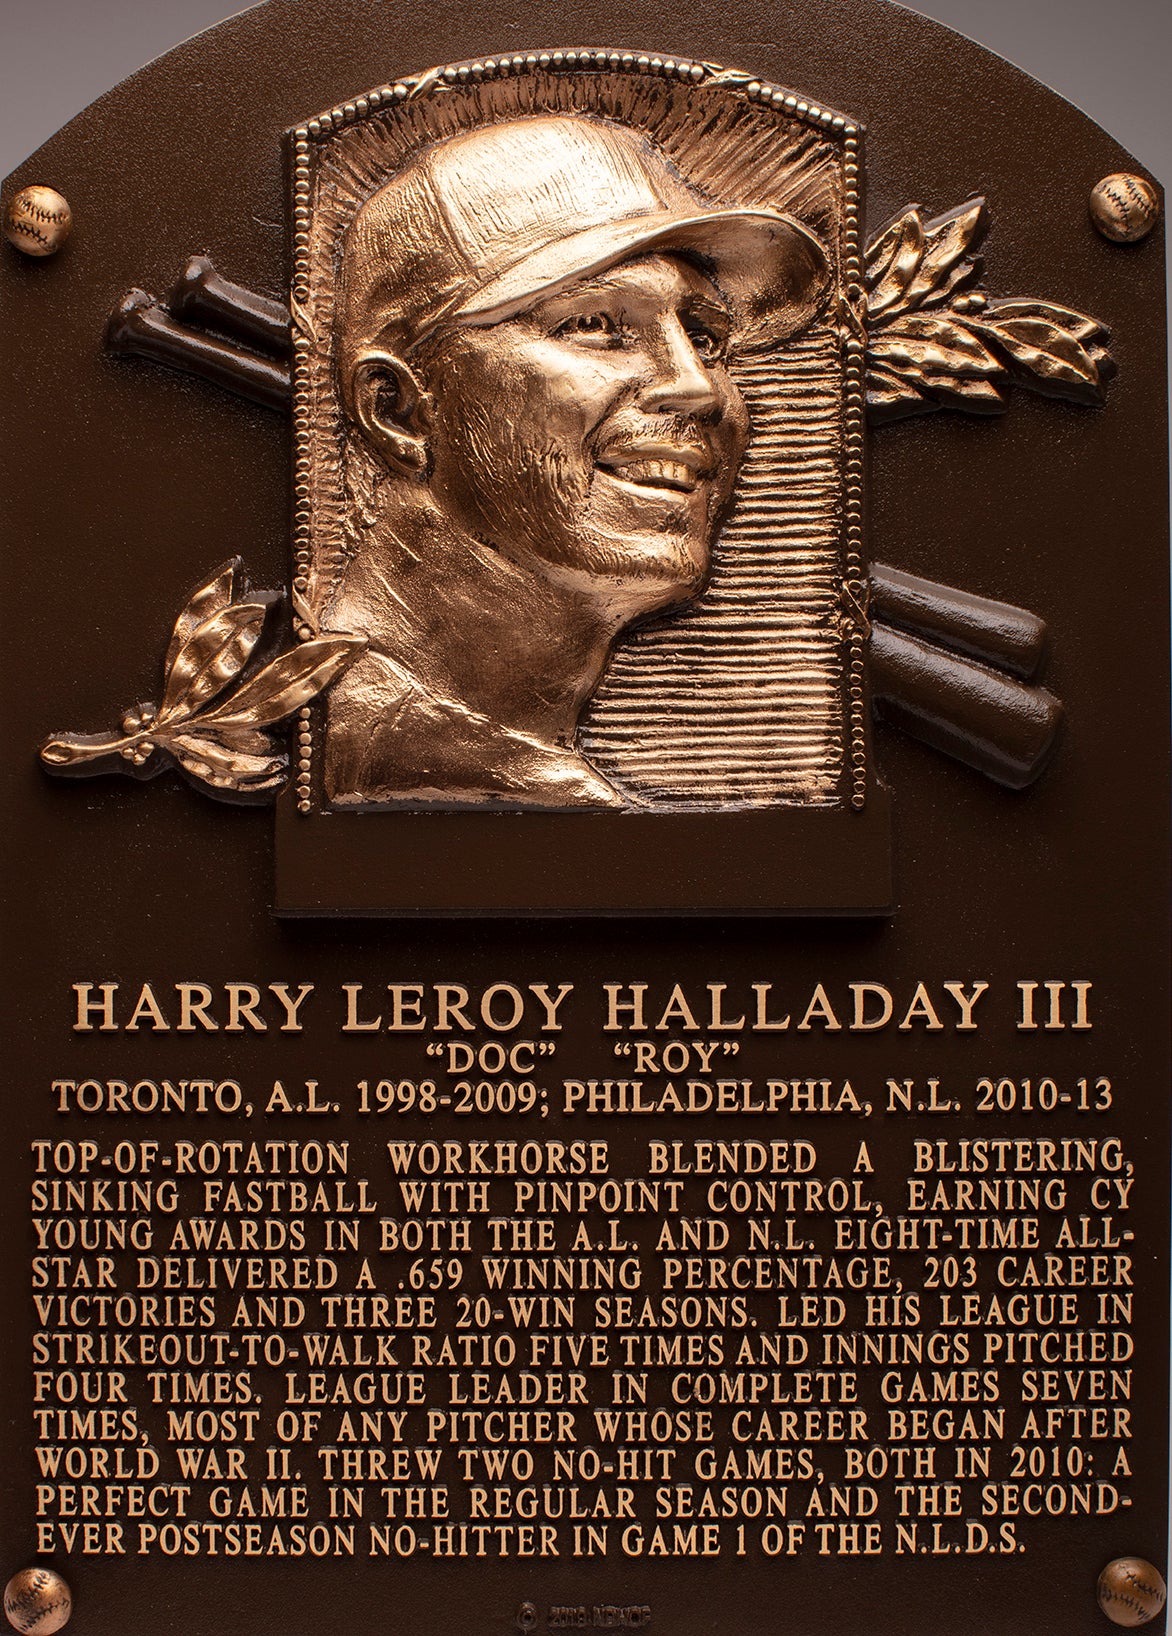 Roy Halladay Hall of Fame plaque